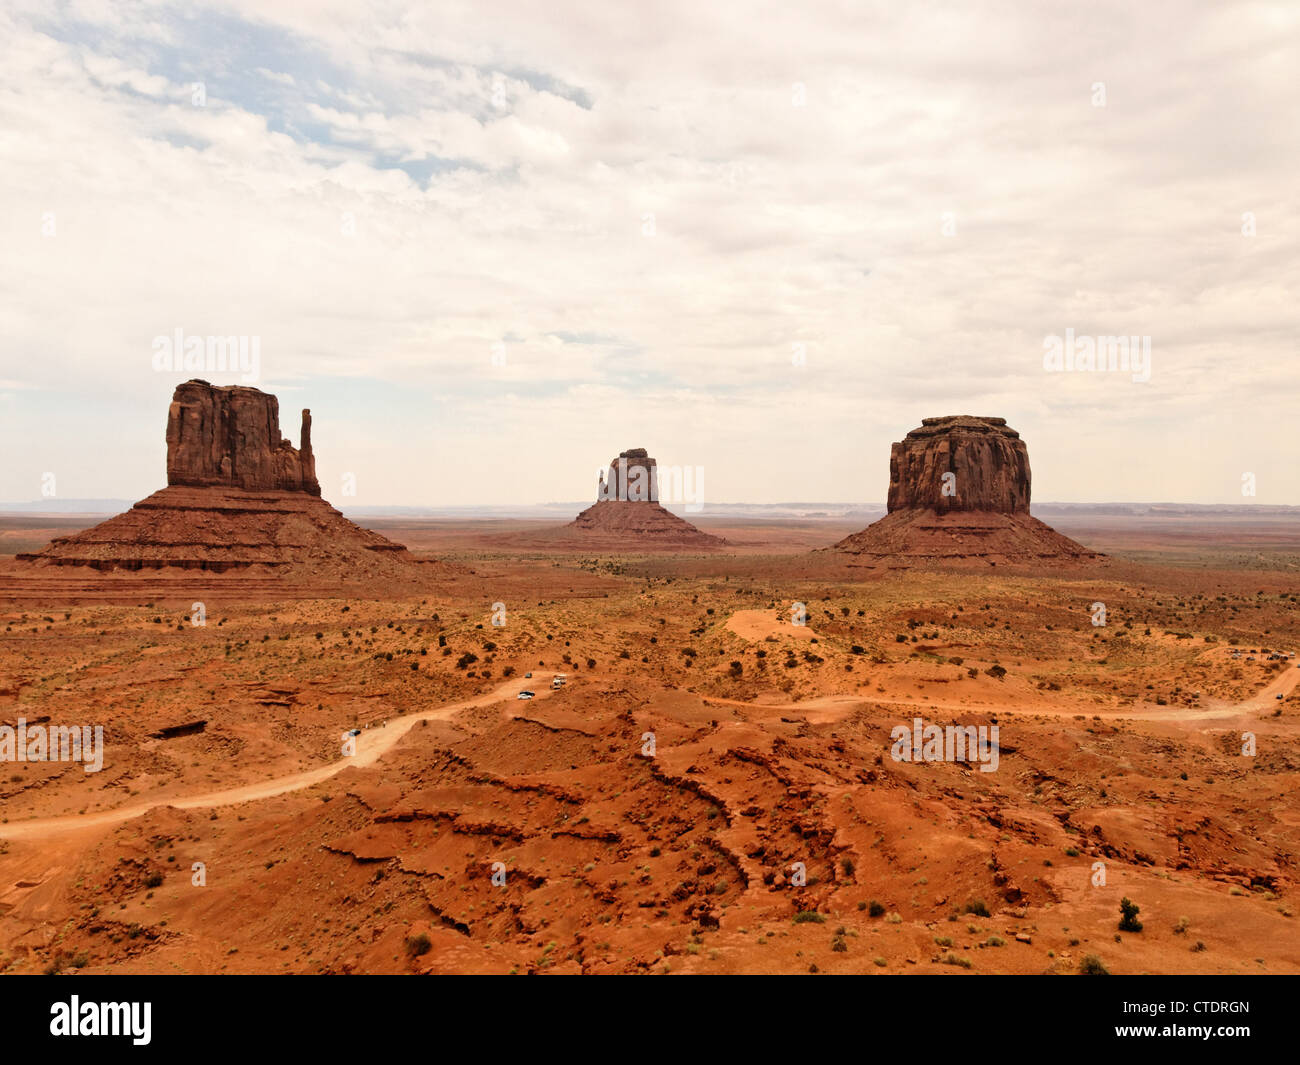 View of the Monument Valley Panorama which is a region of the Colorado Plateau. Stock Photo